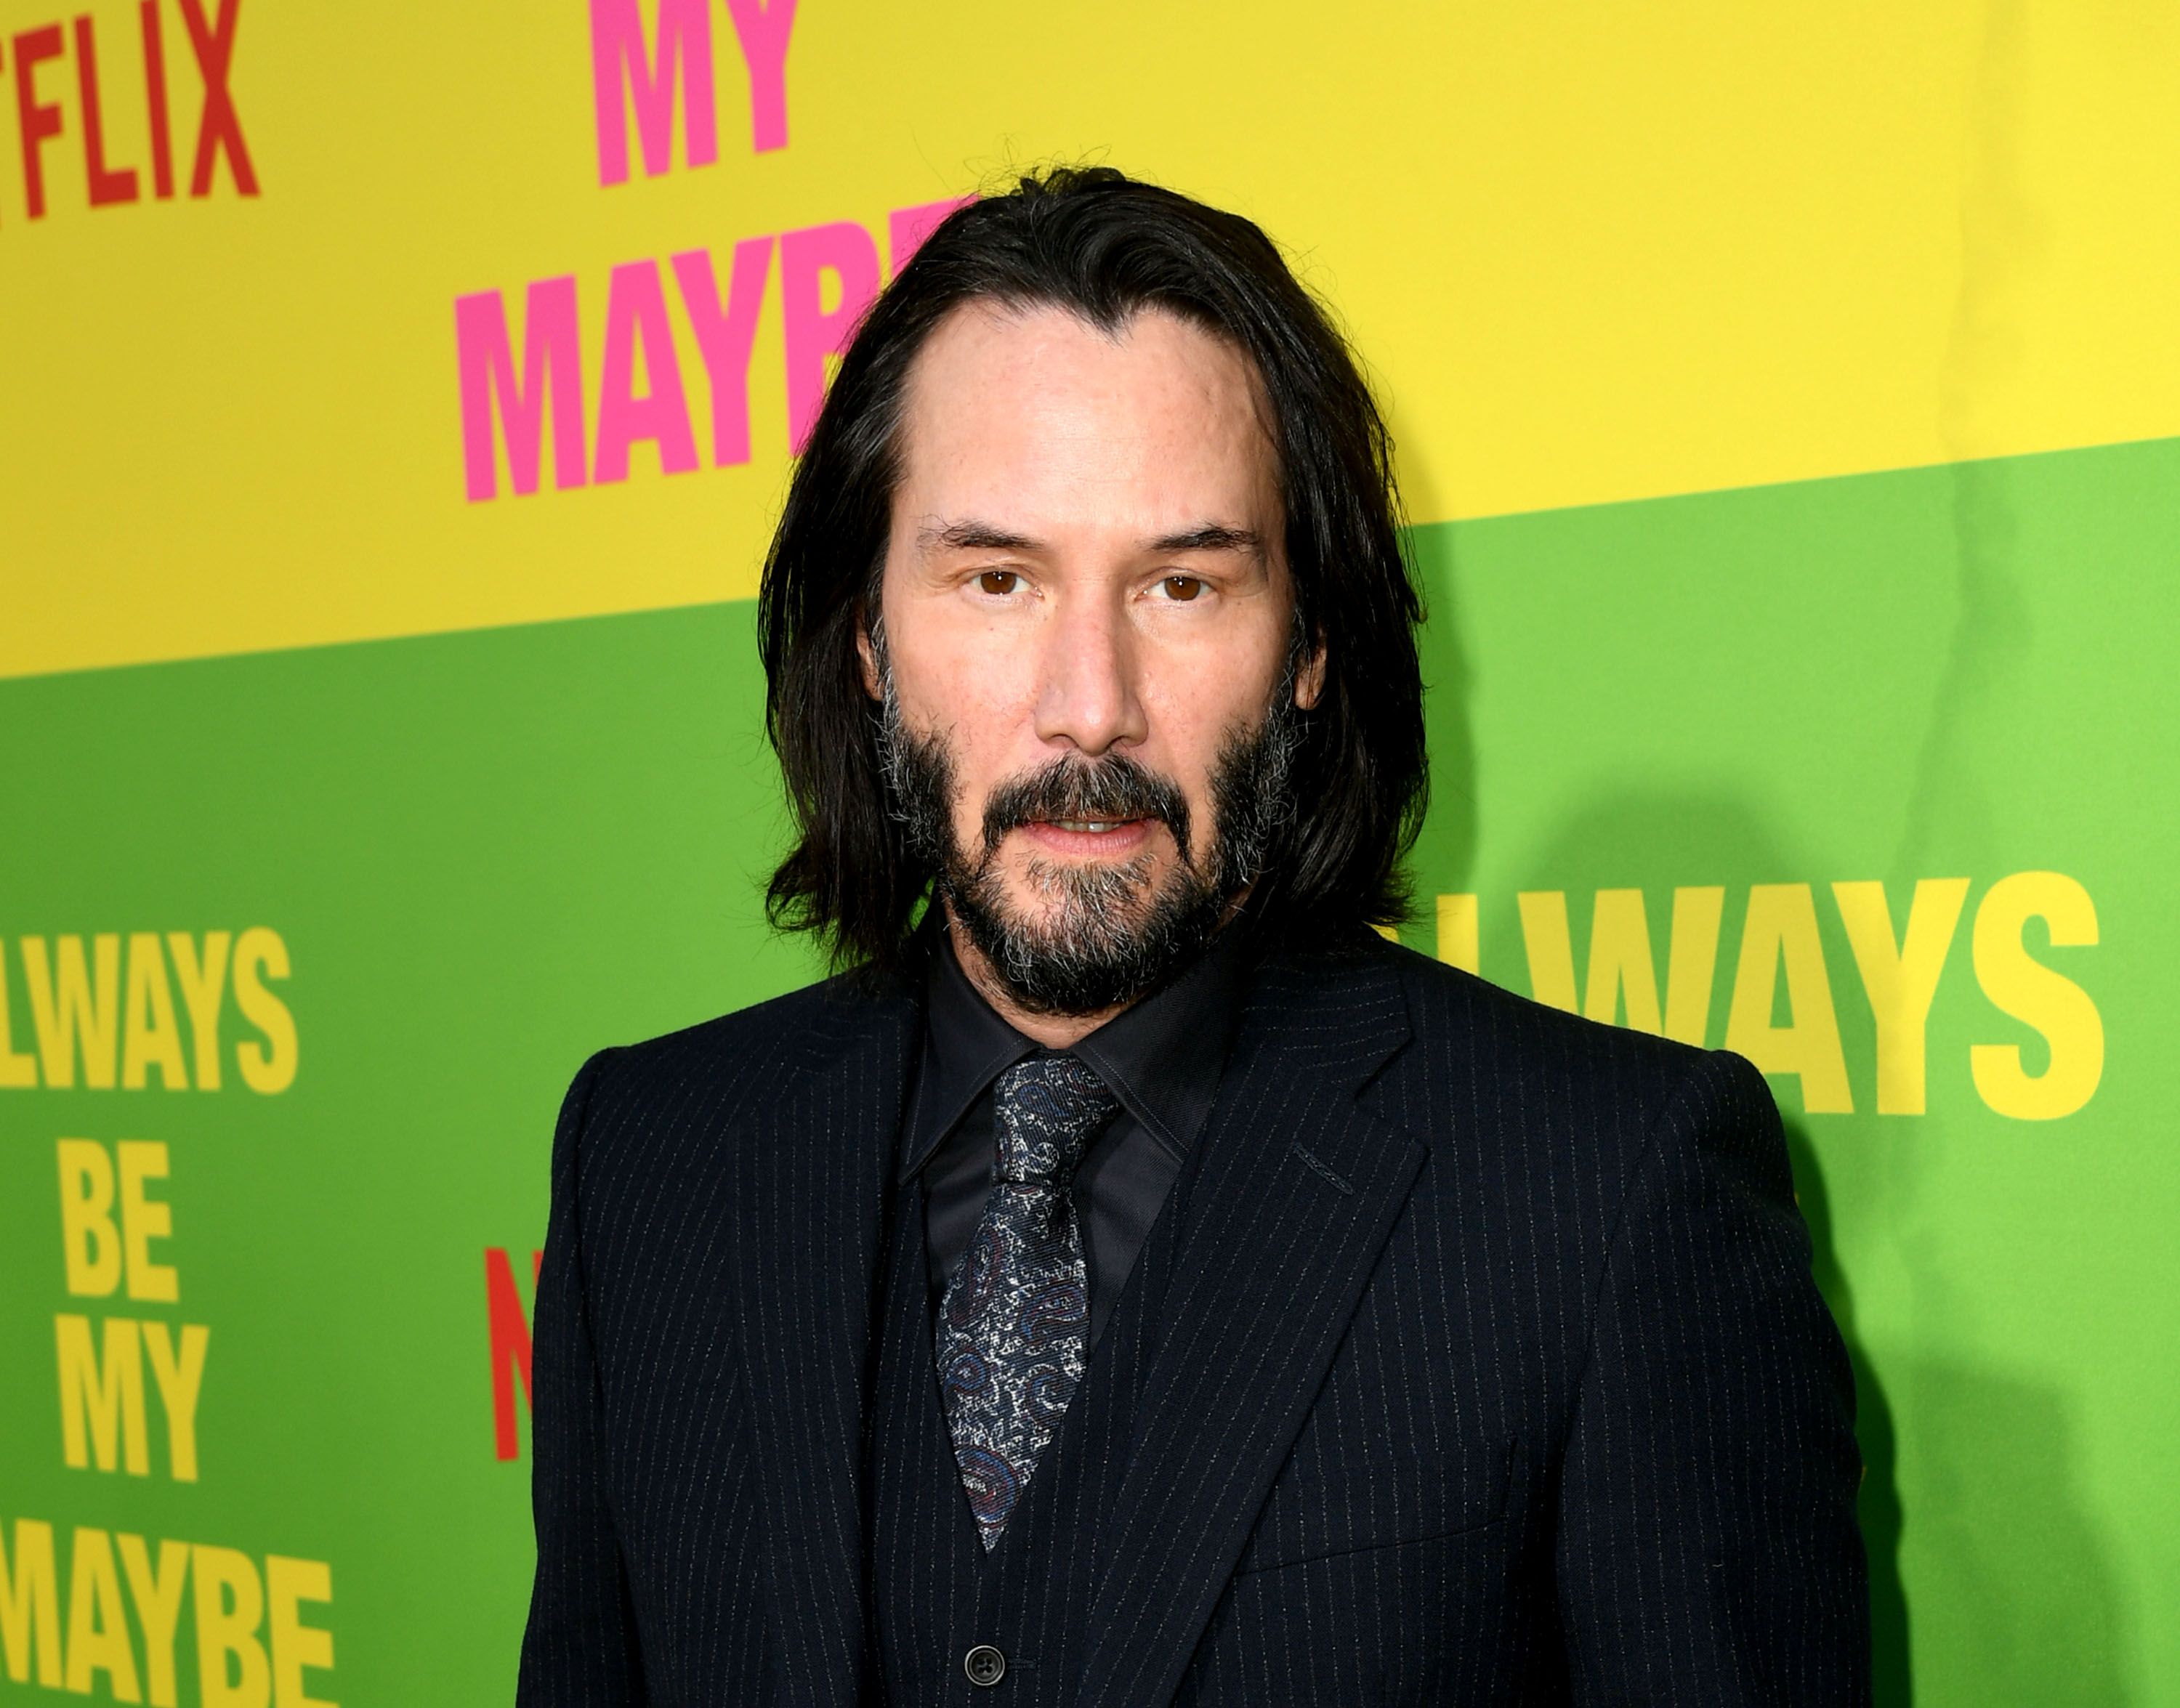 Keanu Reeves during the premiere of Netflix's "Always Be My Maybe" at the Regency Village Theatre on May 22, 2019, in Westwood, California. | Source: Getty Images